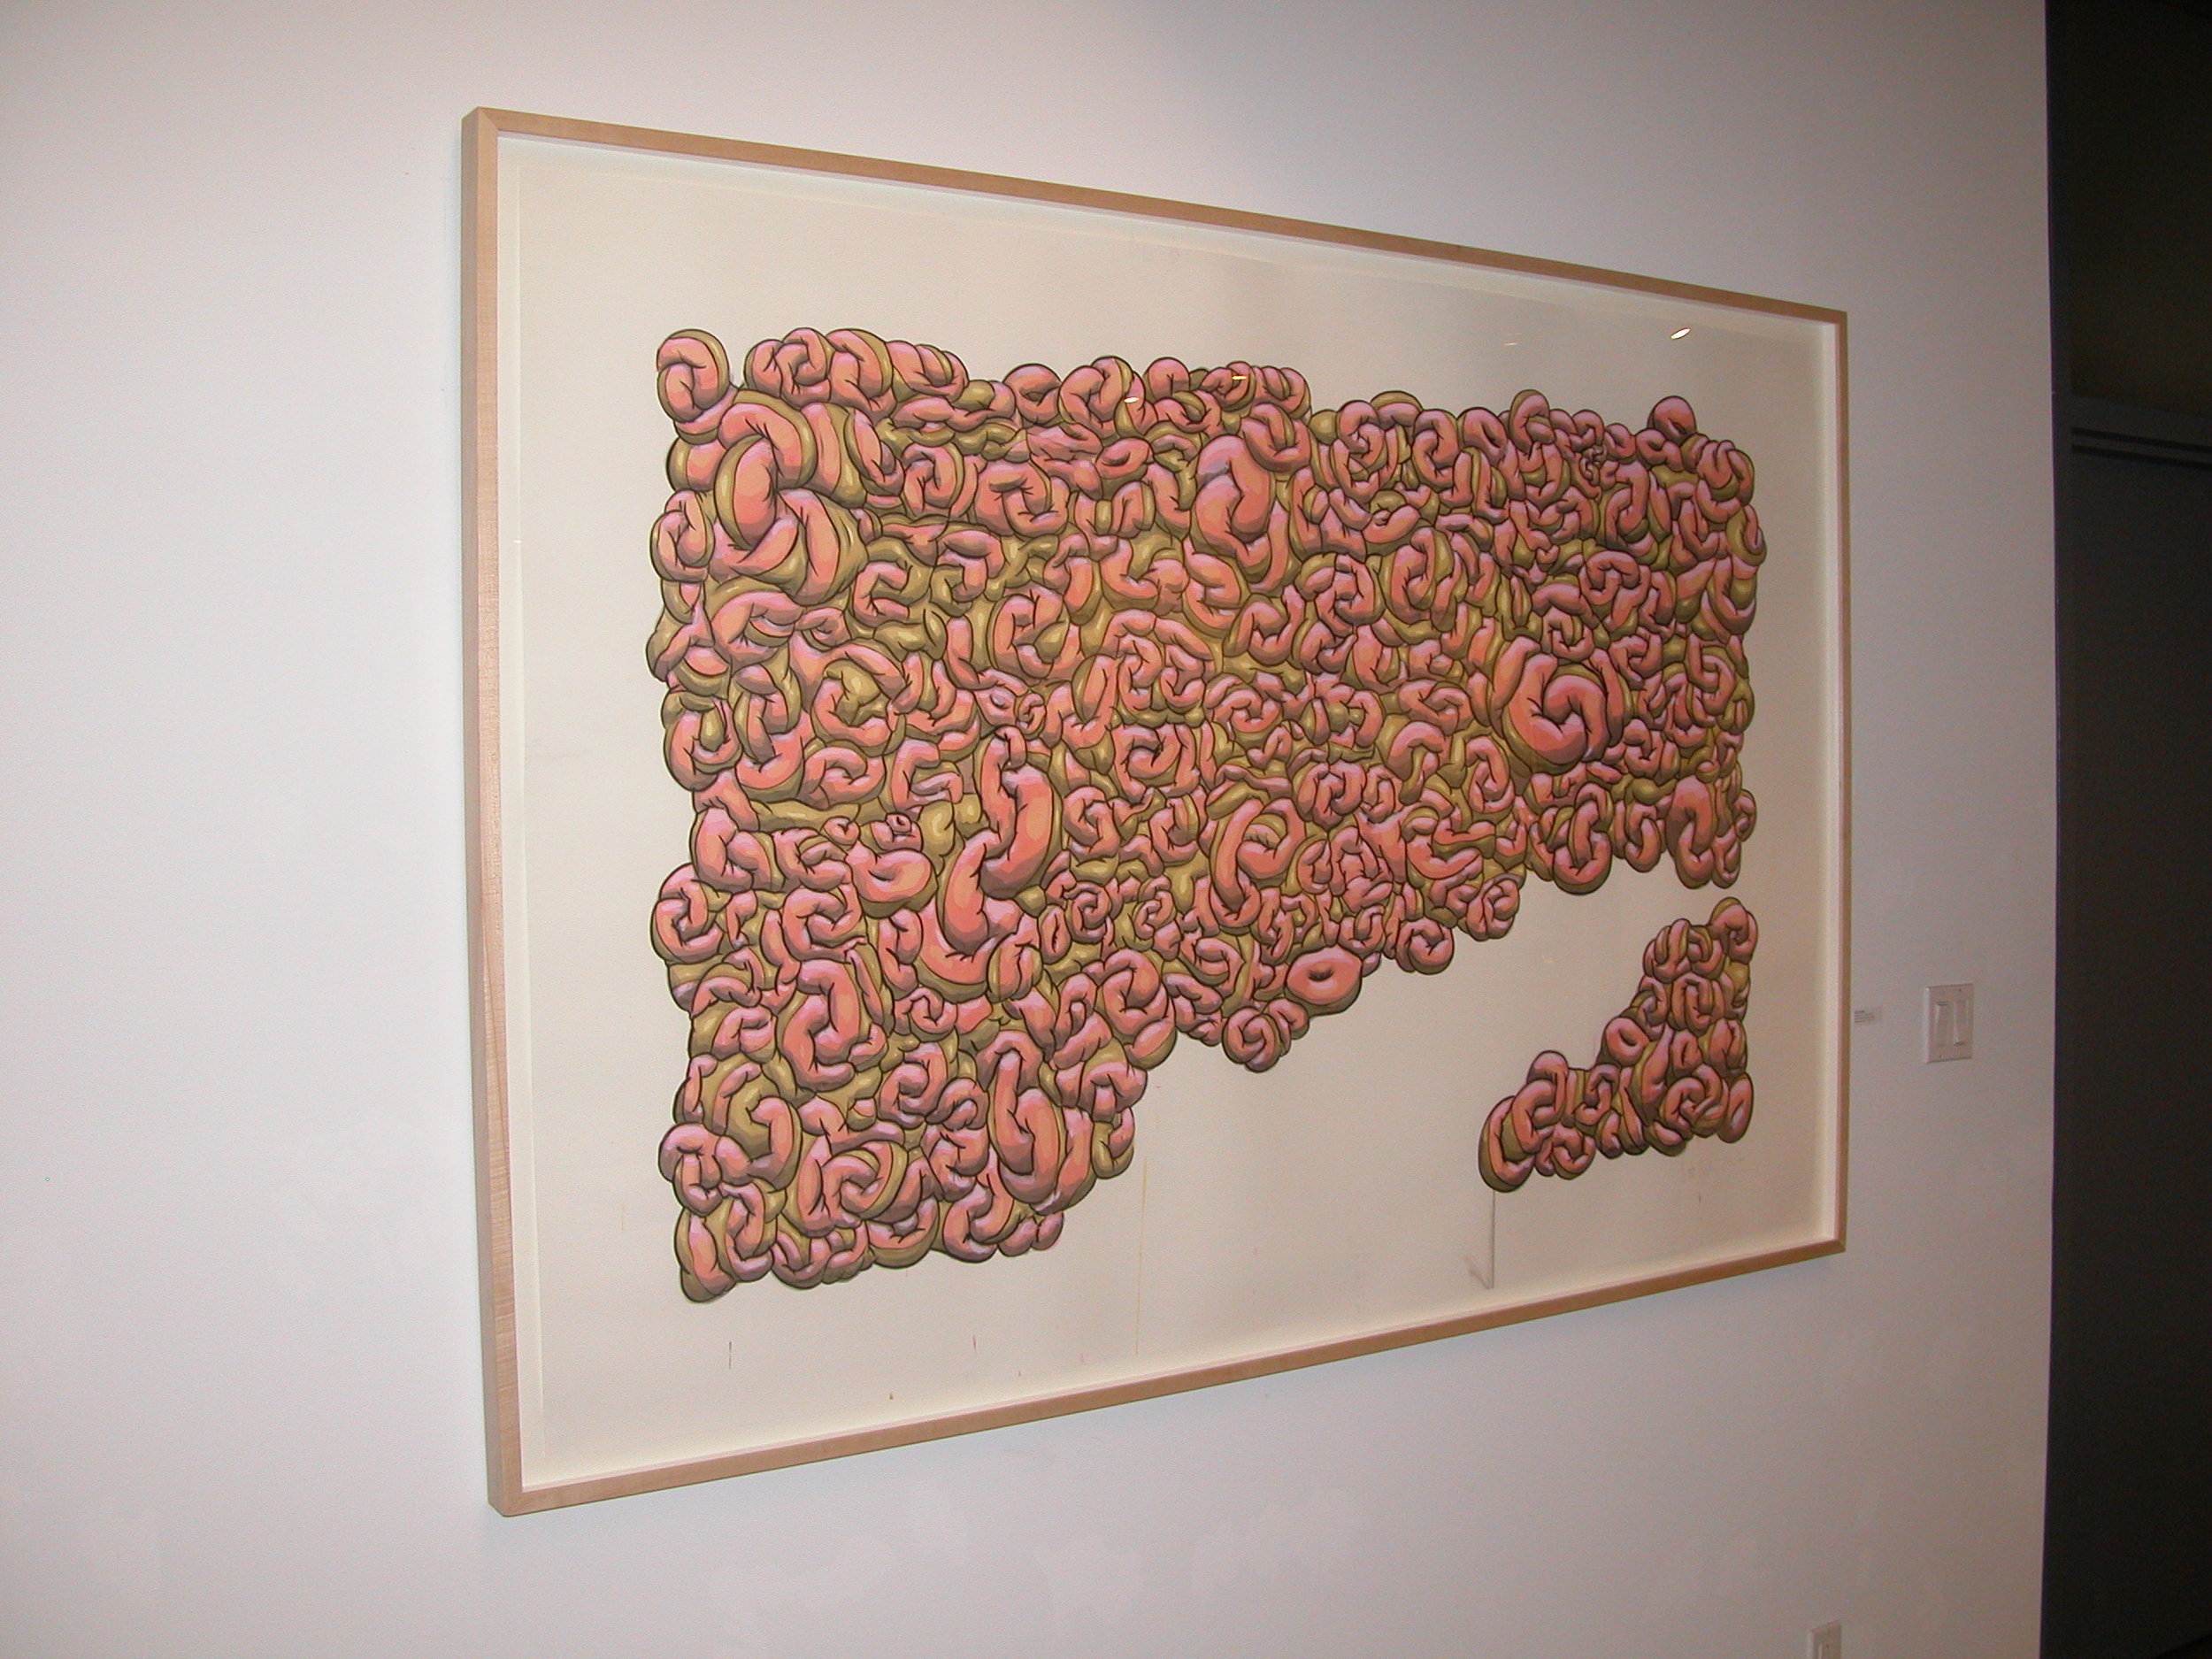  Miami Donut Orgy, 2007 ink and watercolor on paper 68x43 inches  